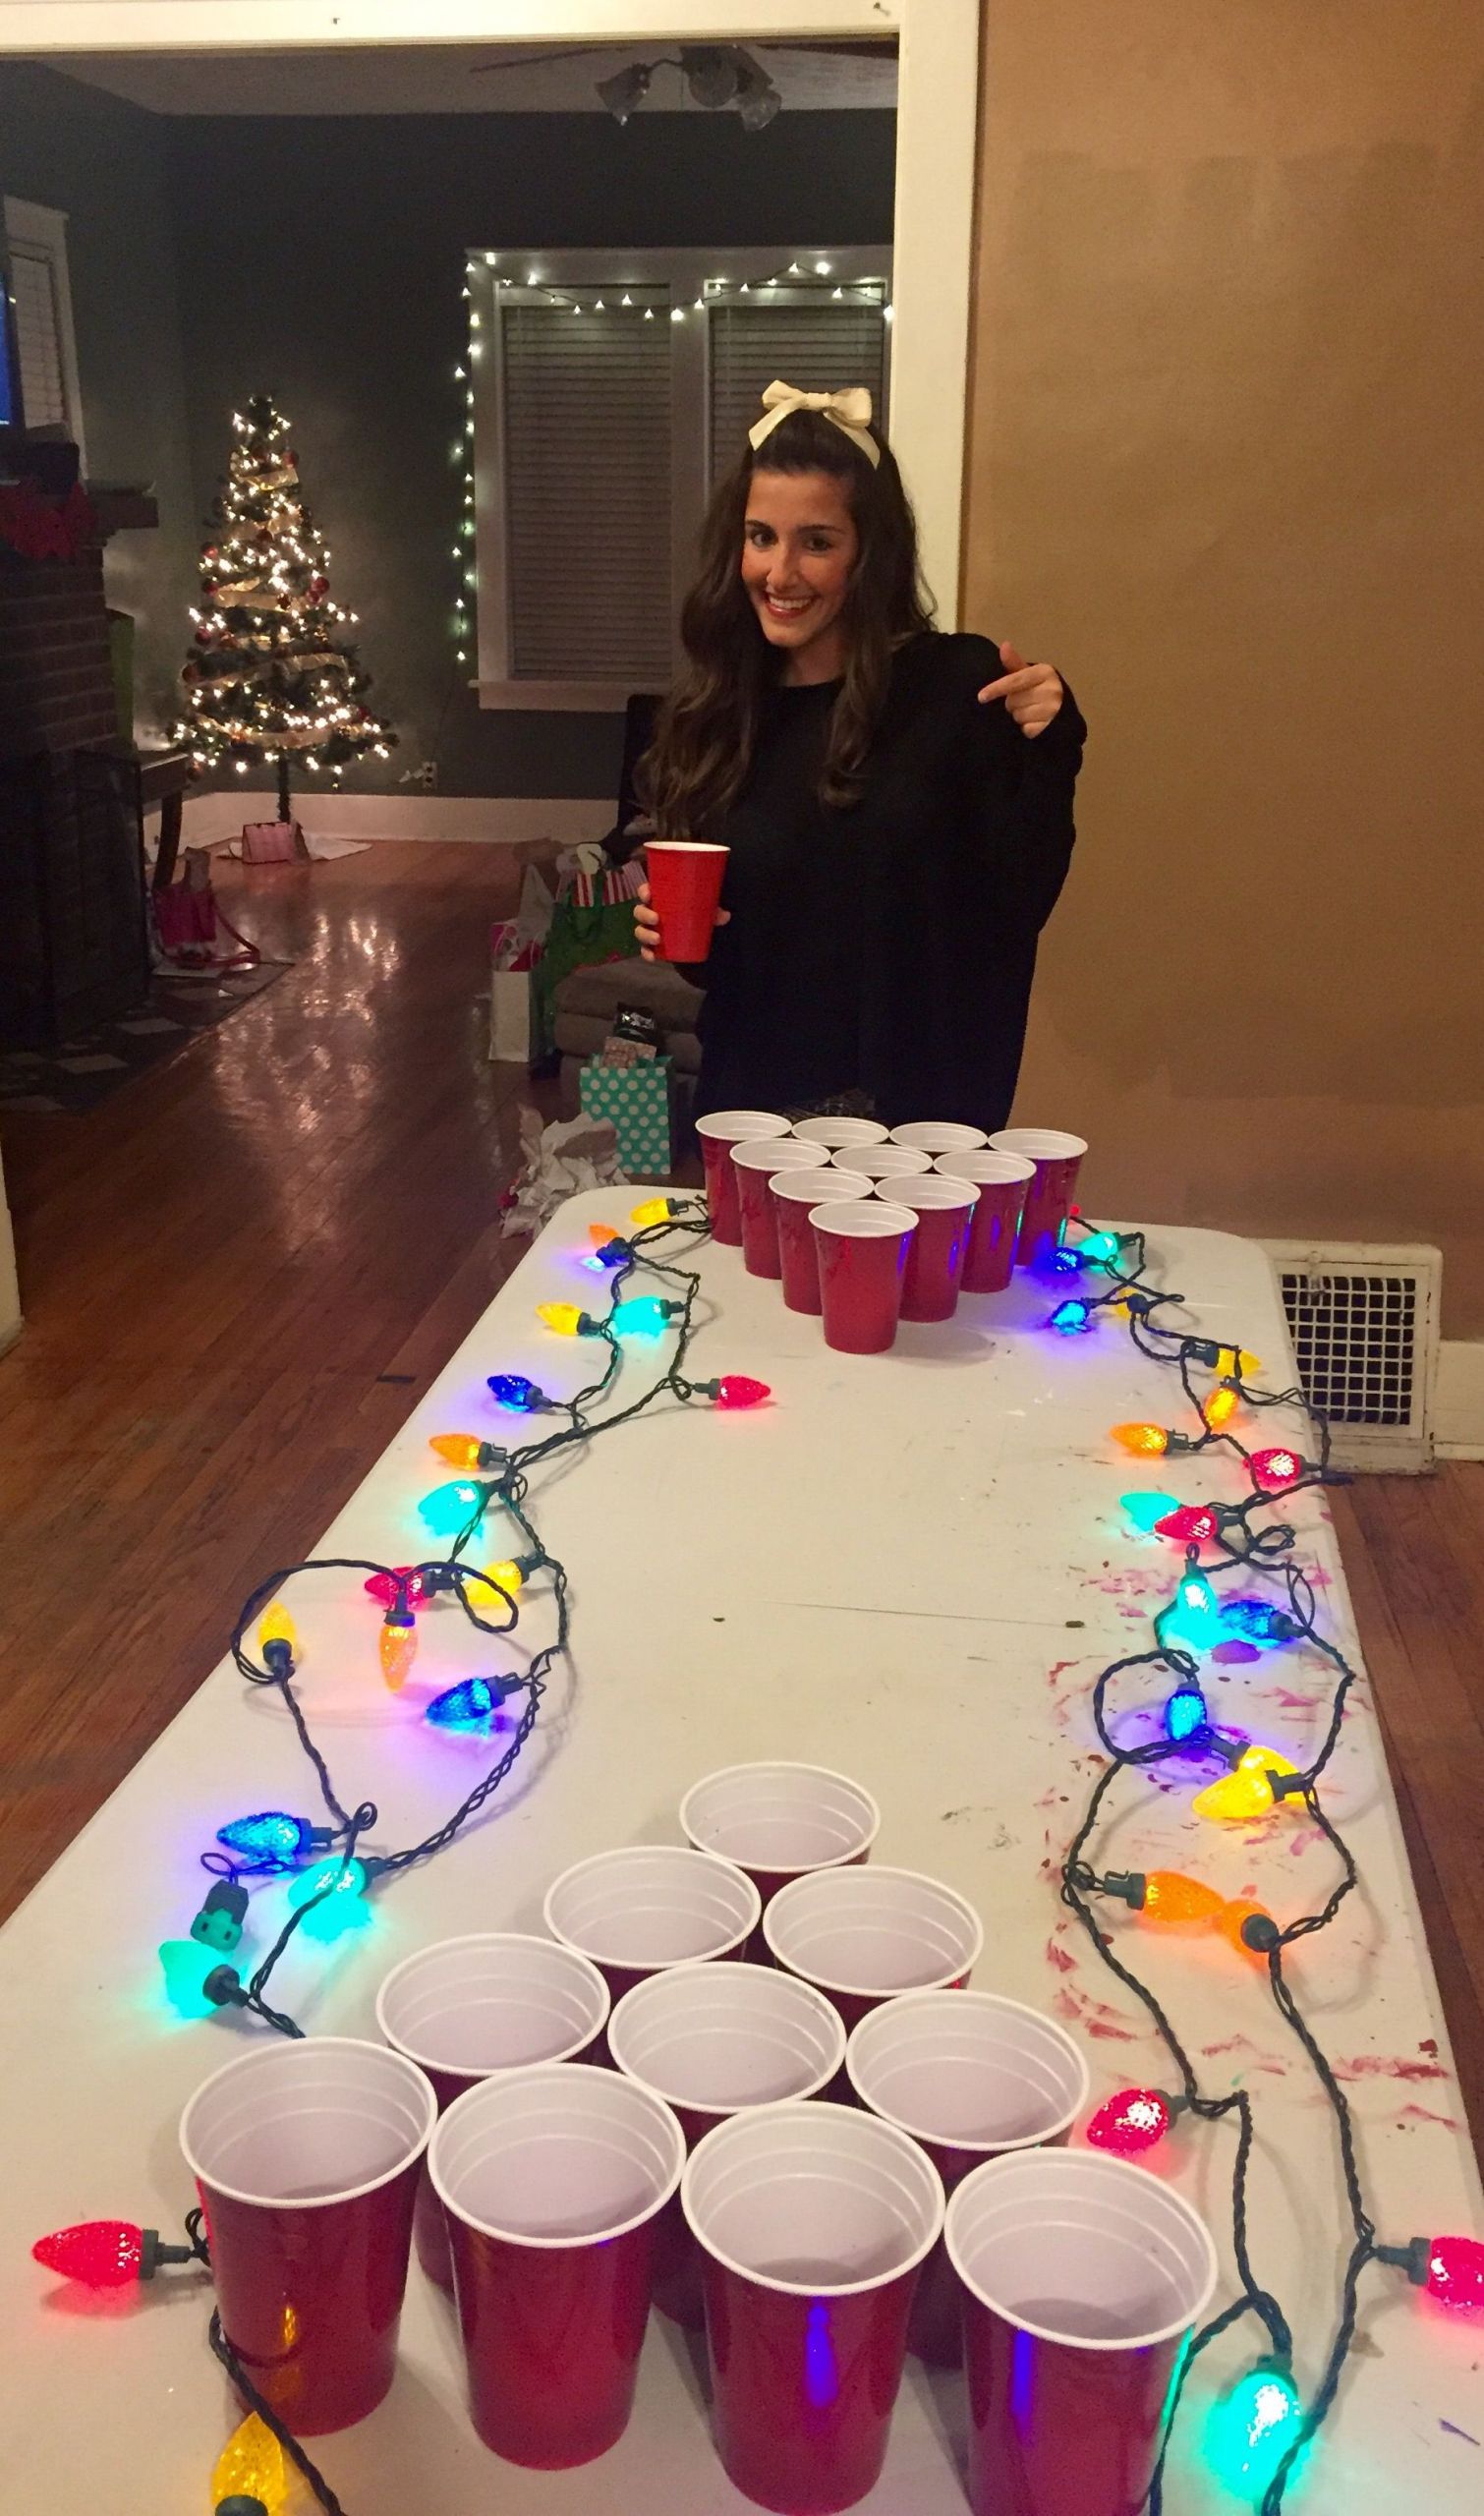 Christmas Pajama Party Ideas
 Making the beer pong table festive TSM